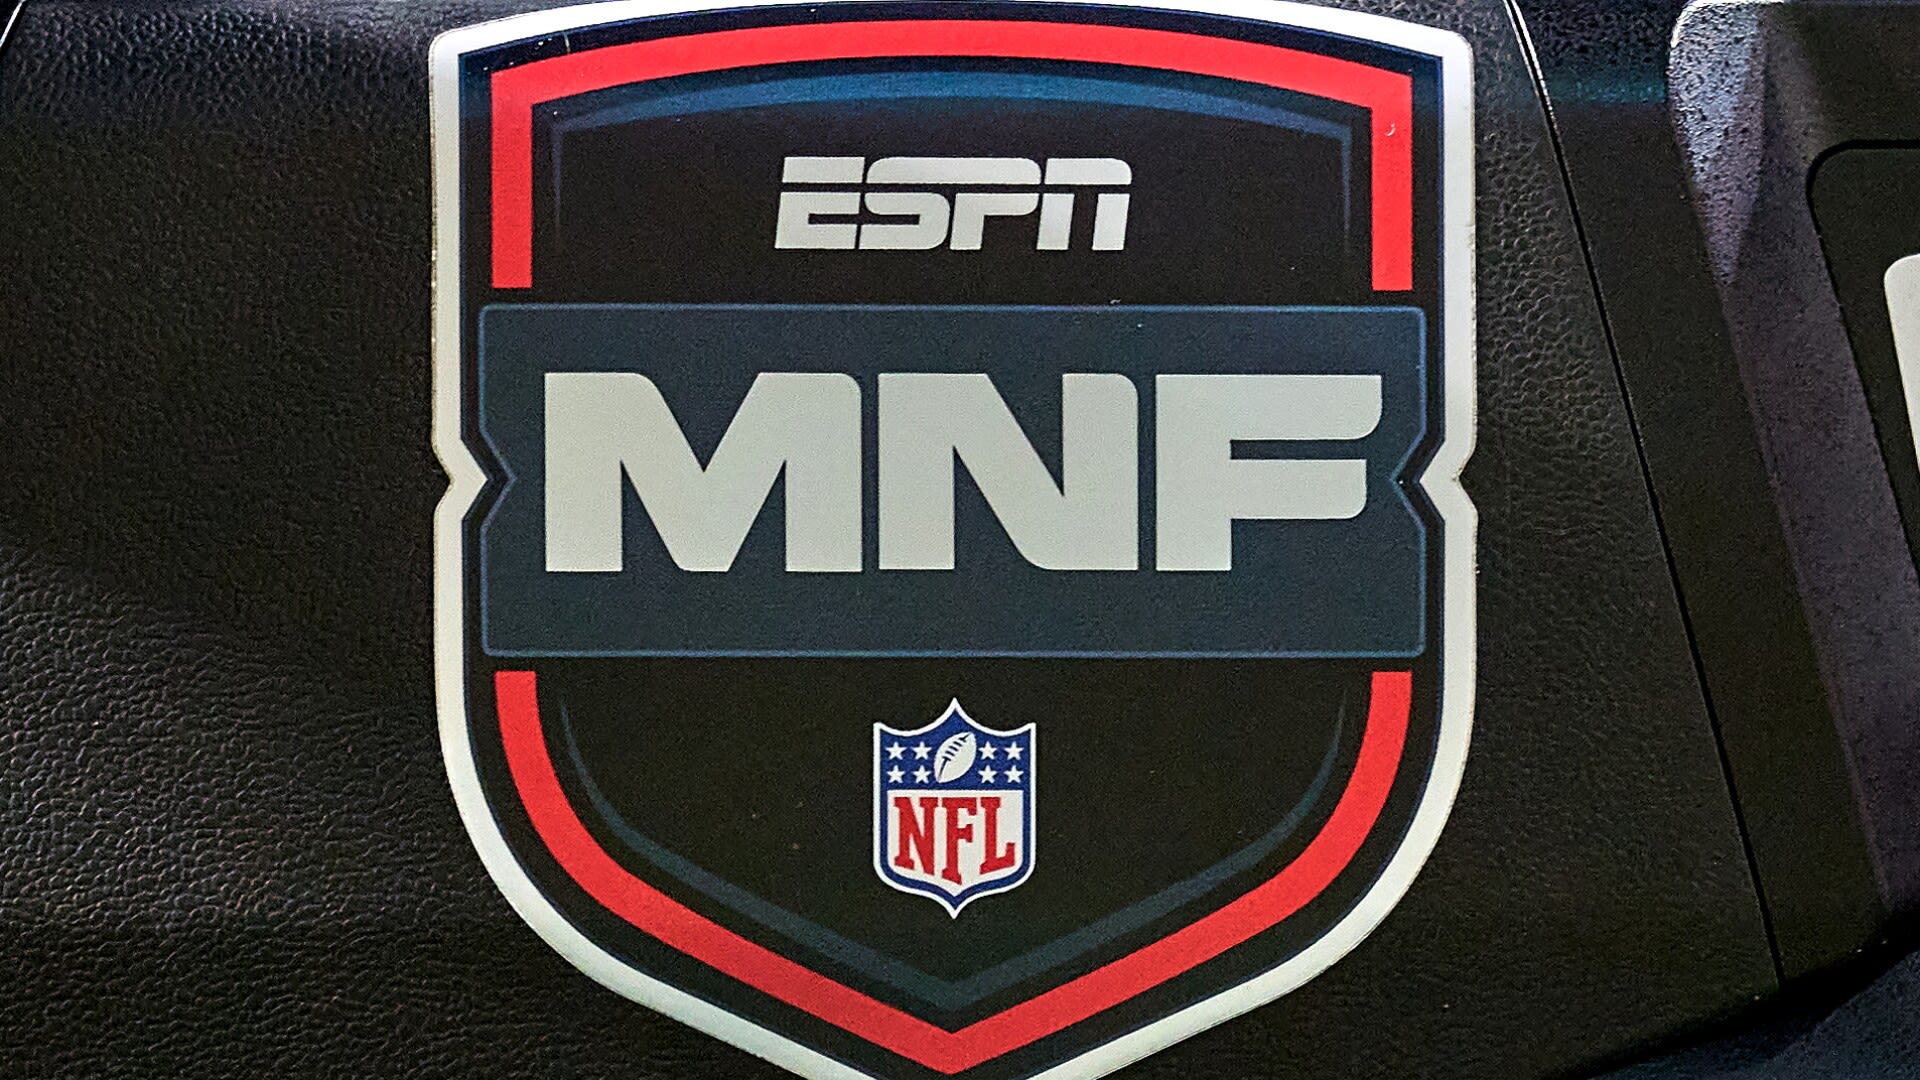 Weekly ESPN/ABC simulcasts of Monday Night Football will end in 2024